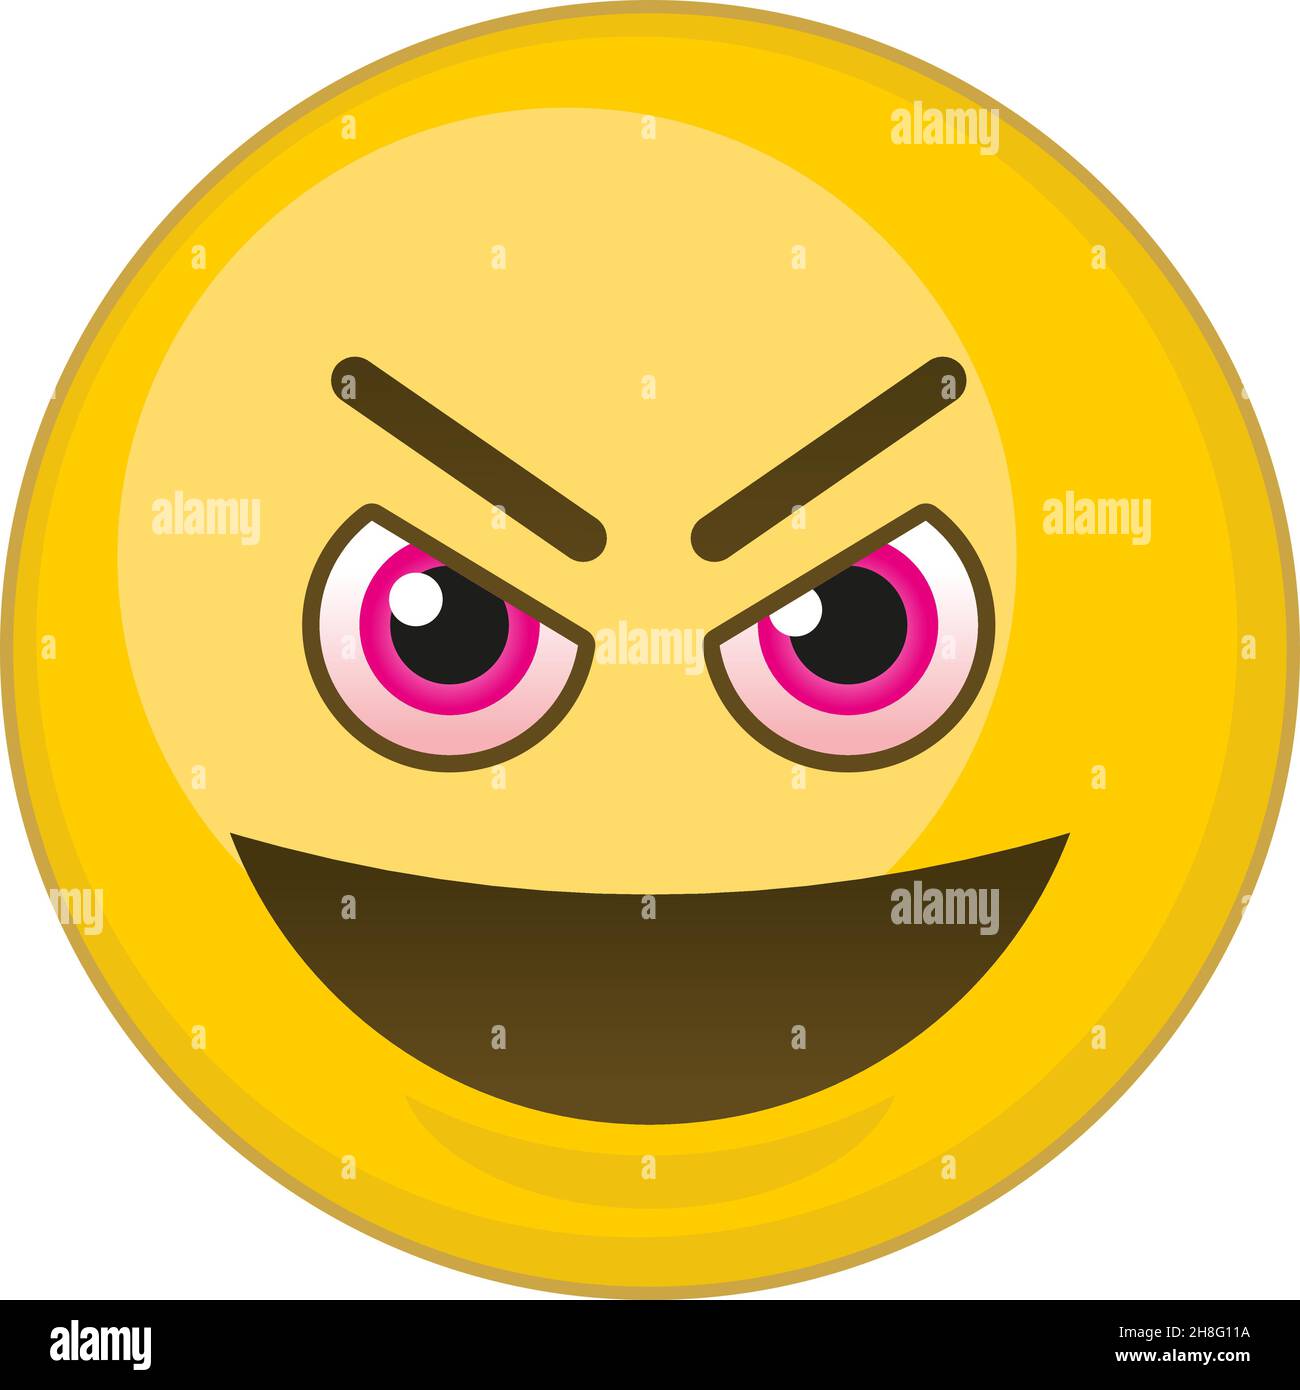 Evil grinface. Yellow ball with red eyes. Bad behavior symbol Stock Vector